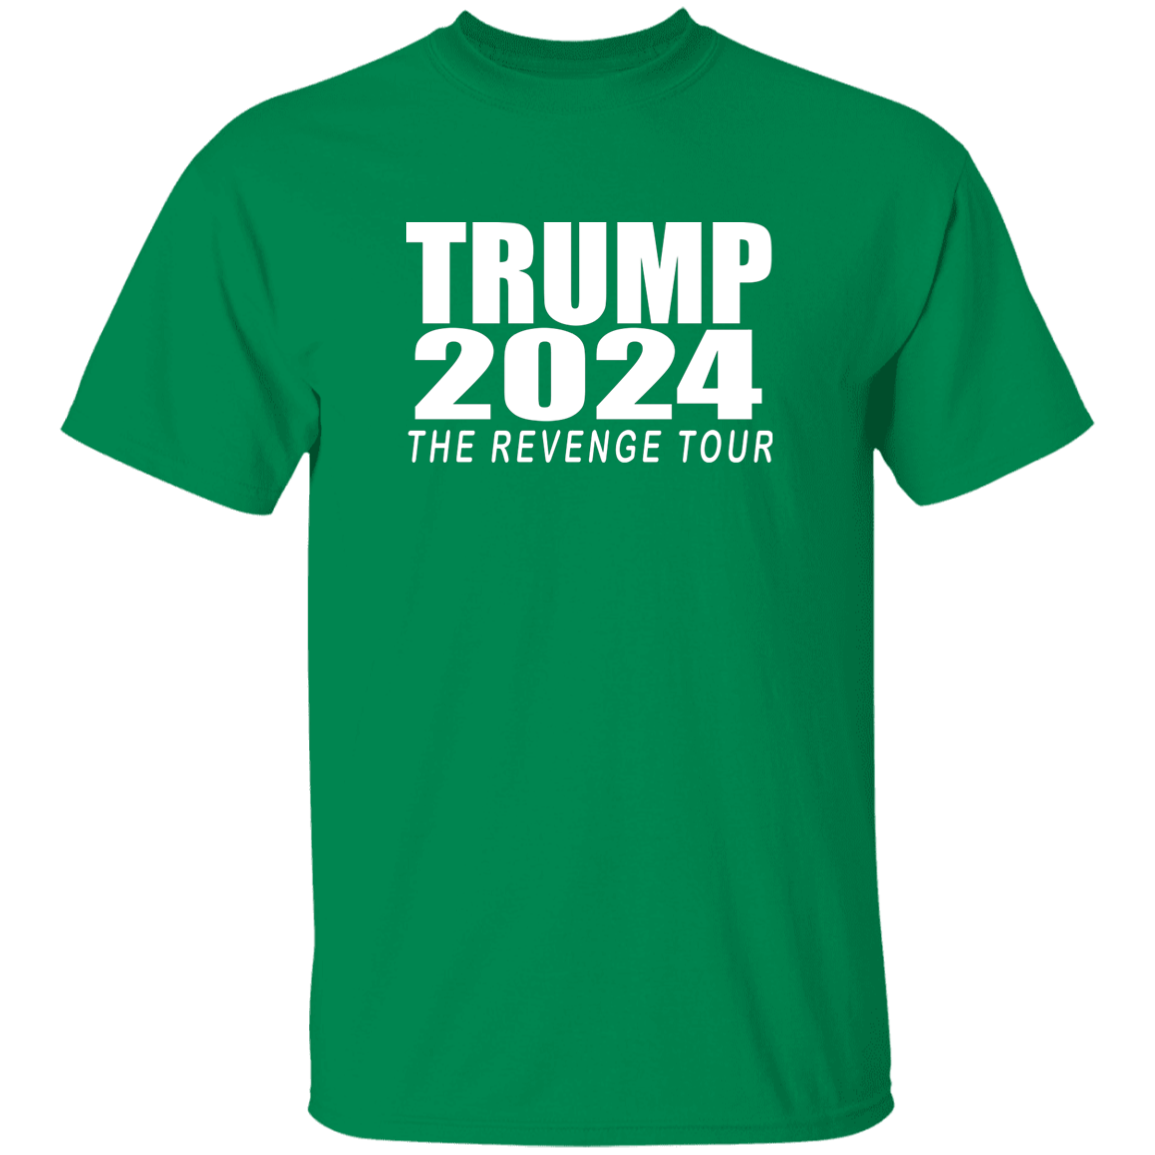 Trump 2024 "The Revenge Tour" TShirt Patriot Powered Products